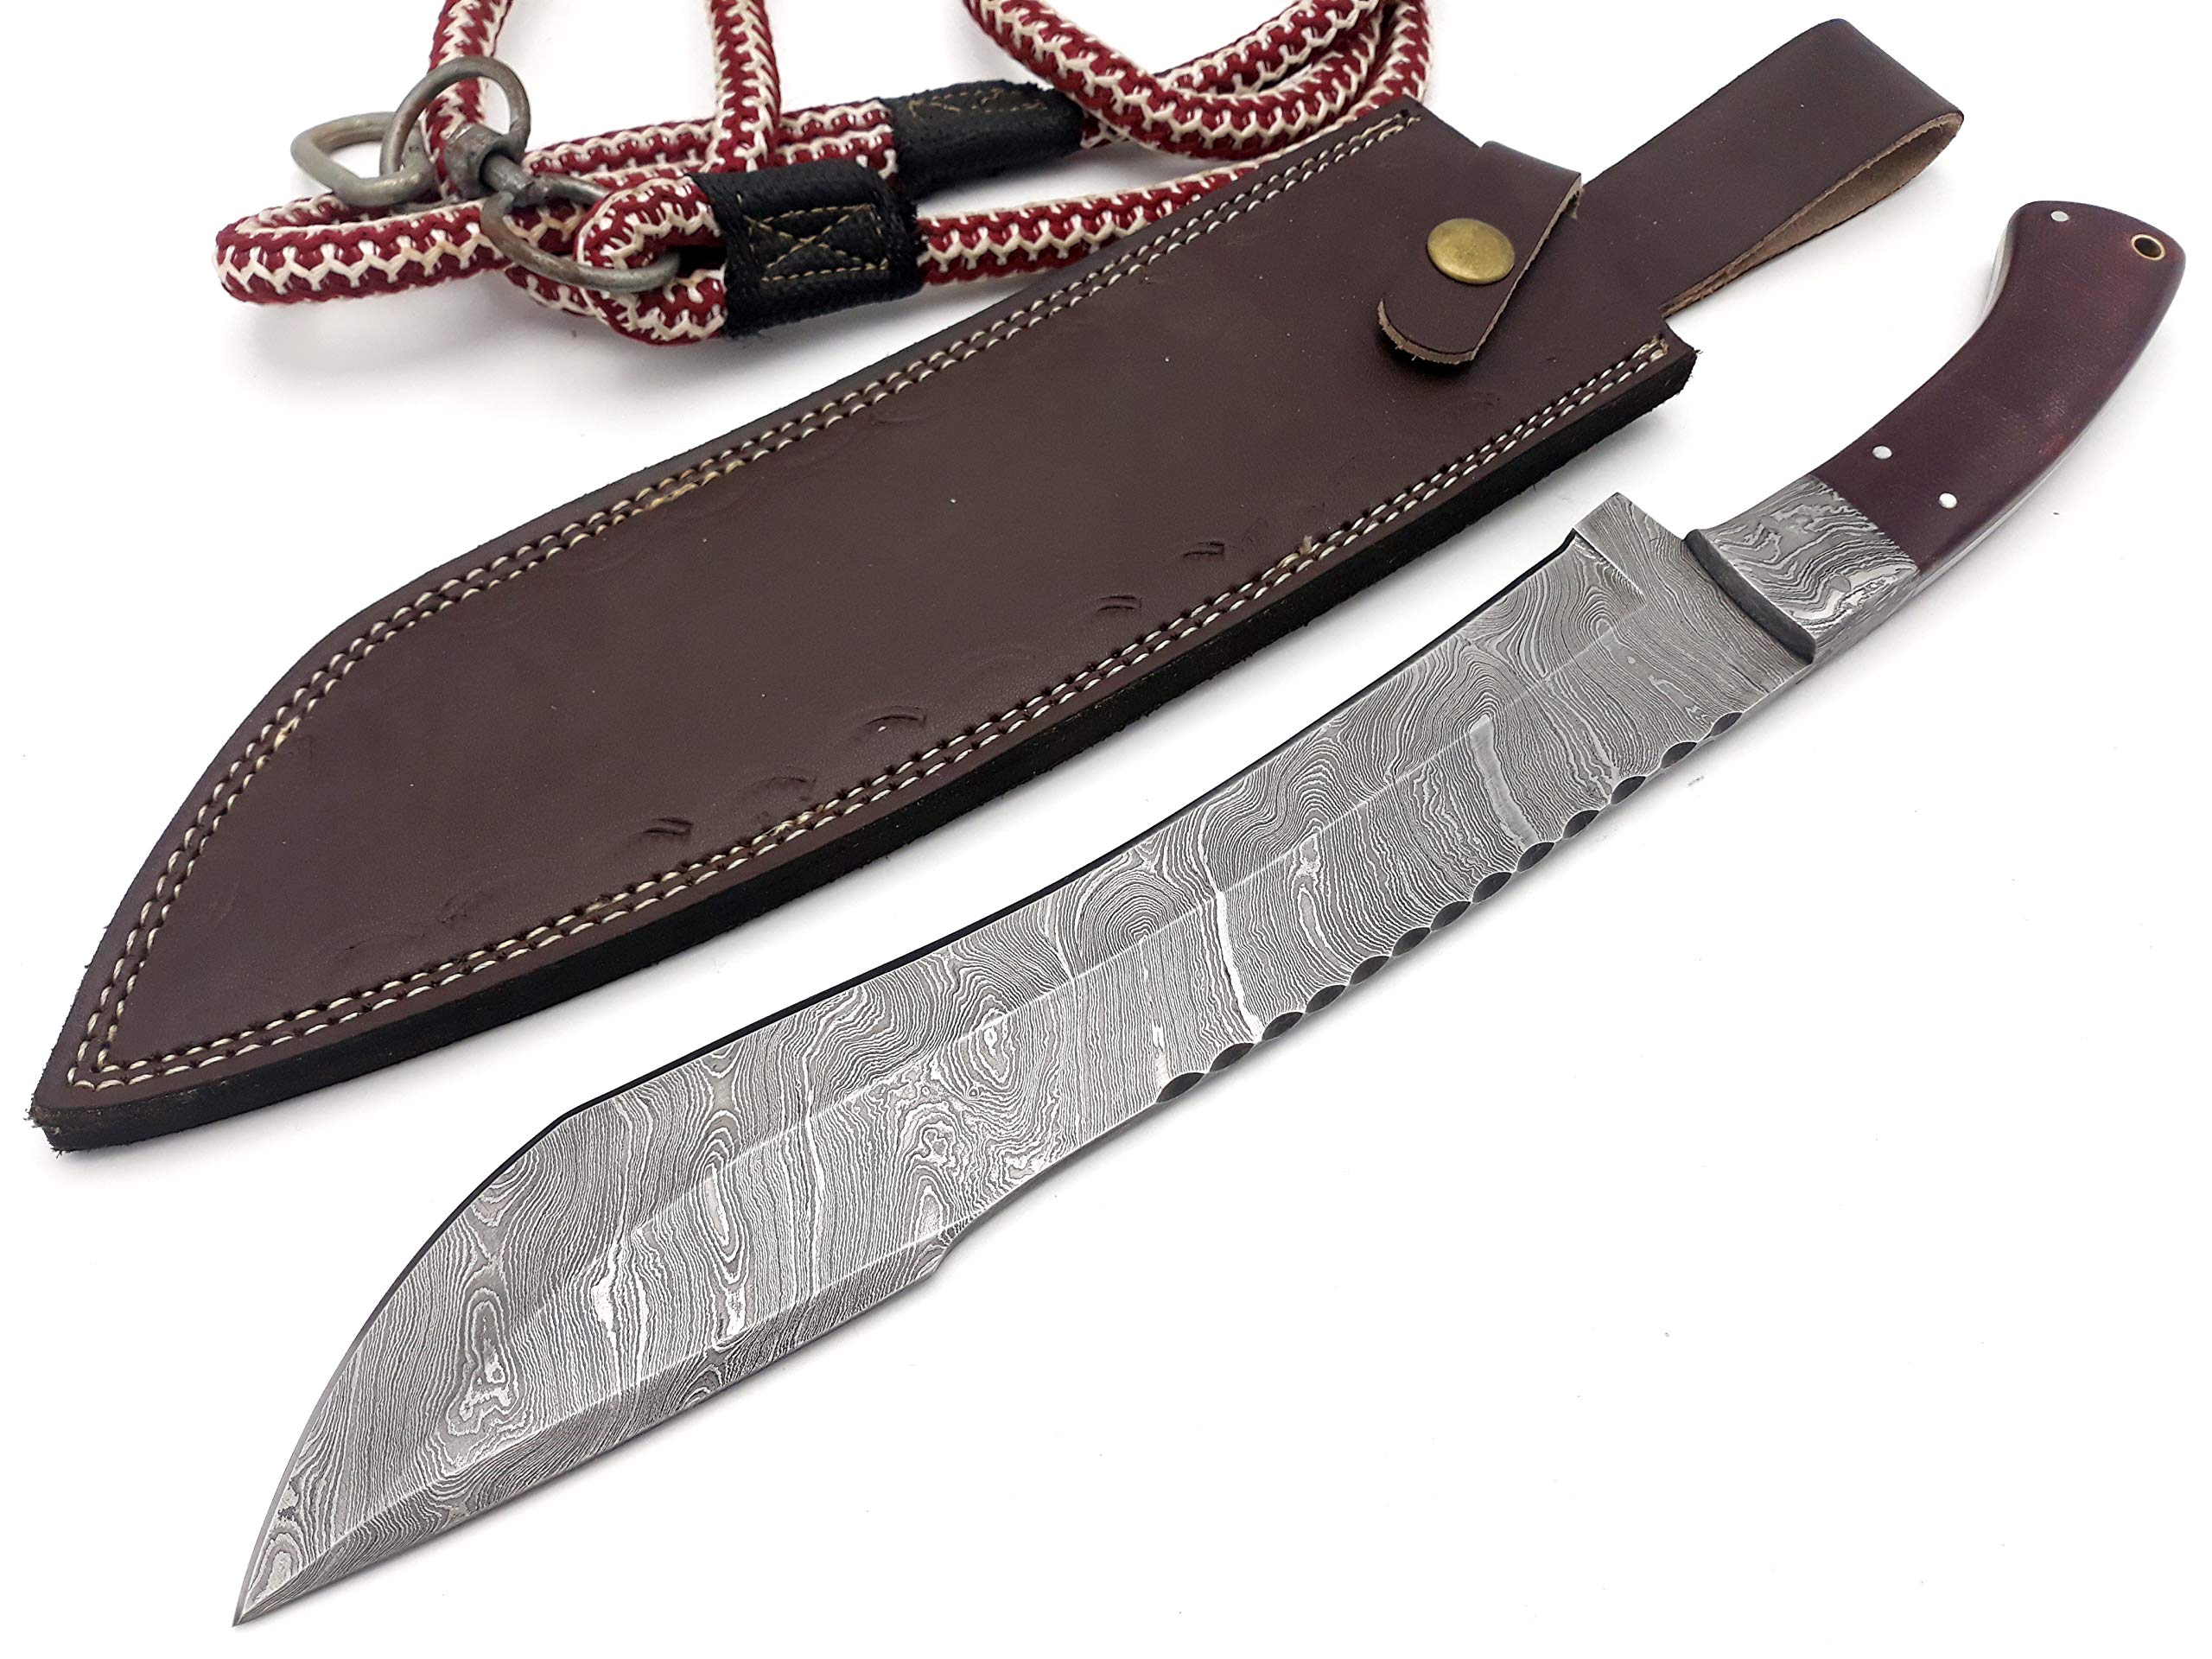 Nooraki-57 Premium Quality Outdoor/Survival/Hunting Knife - Damascus Steel 256 Layers with Genuine Leather Sheath 15 inch Full Tang